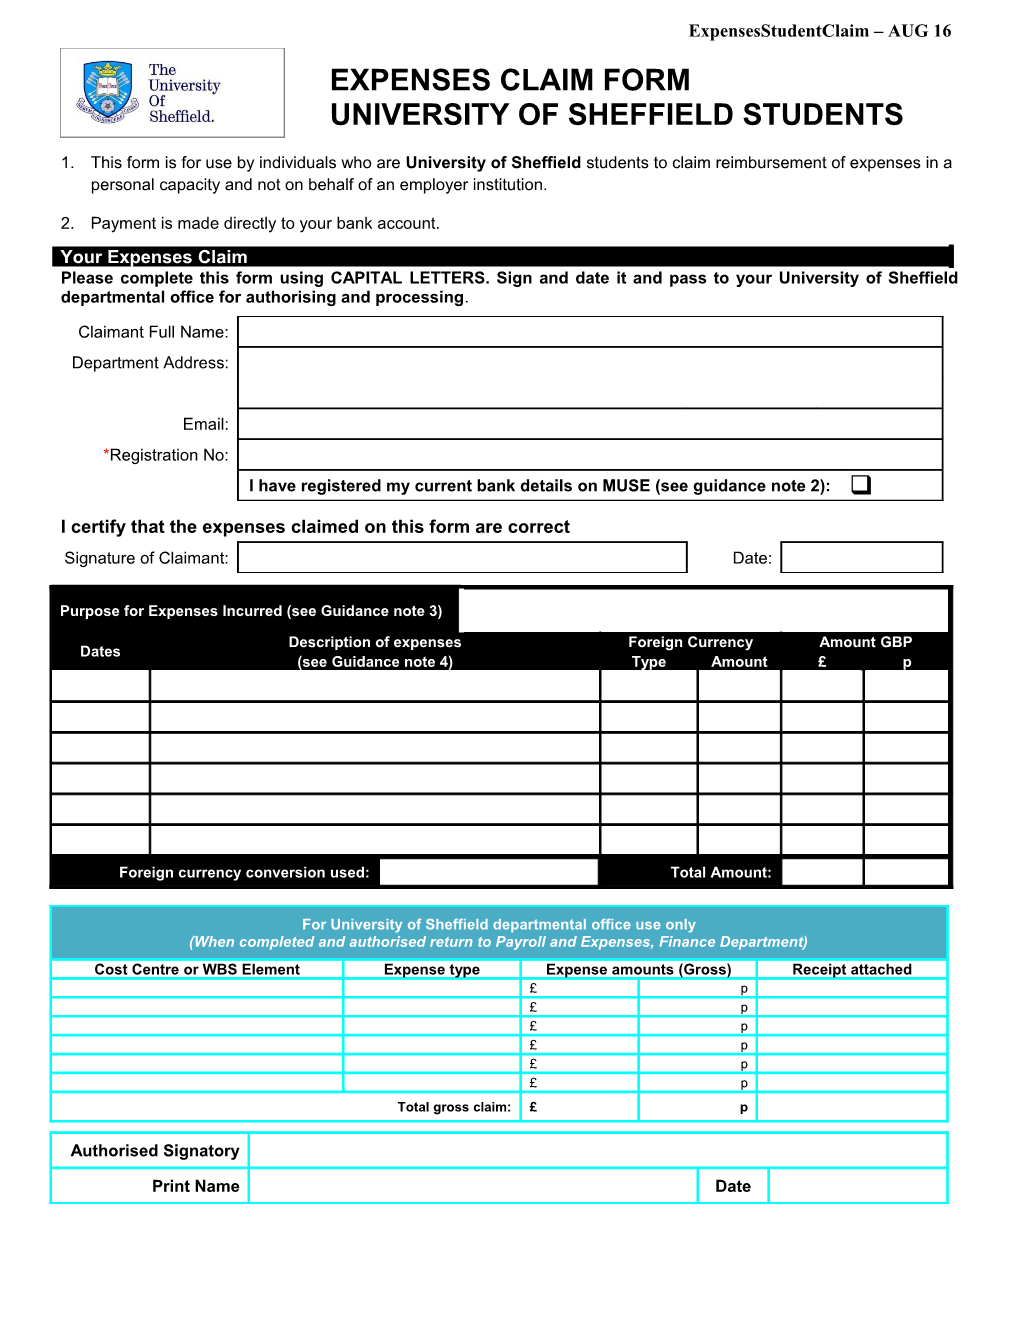 I Certify That the Expenses Claimed on This Form Are Correct